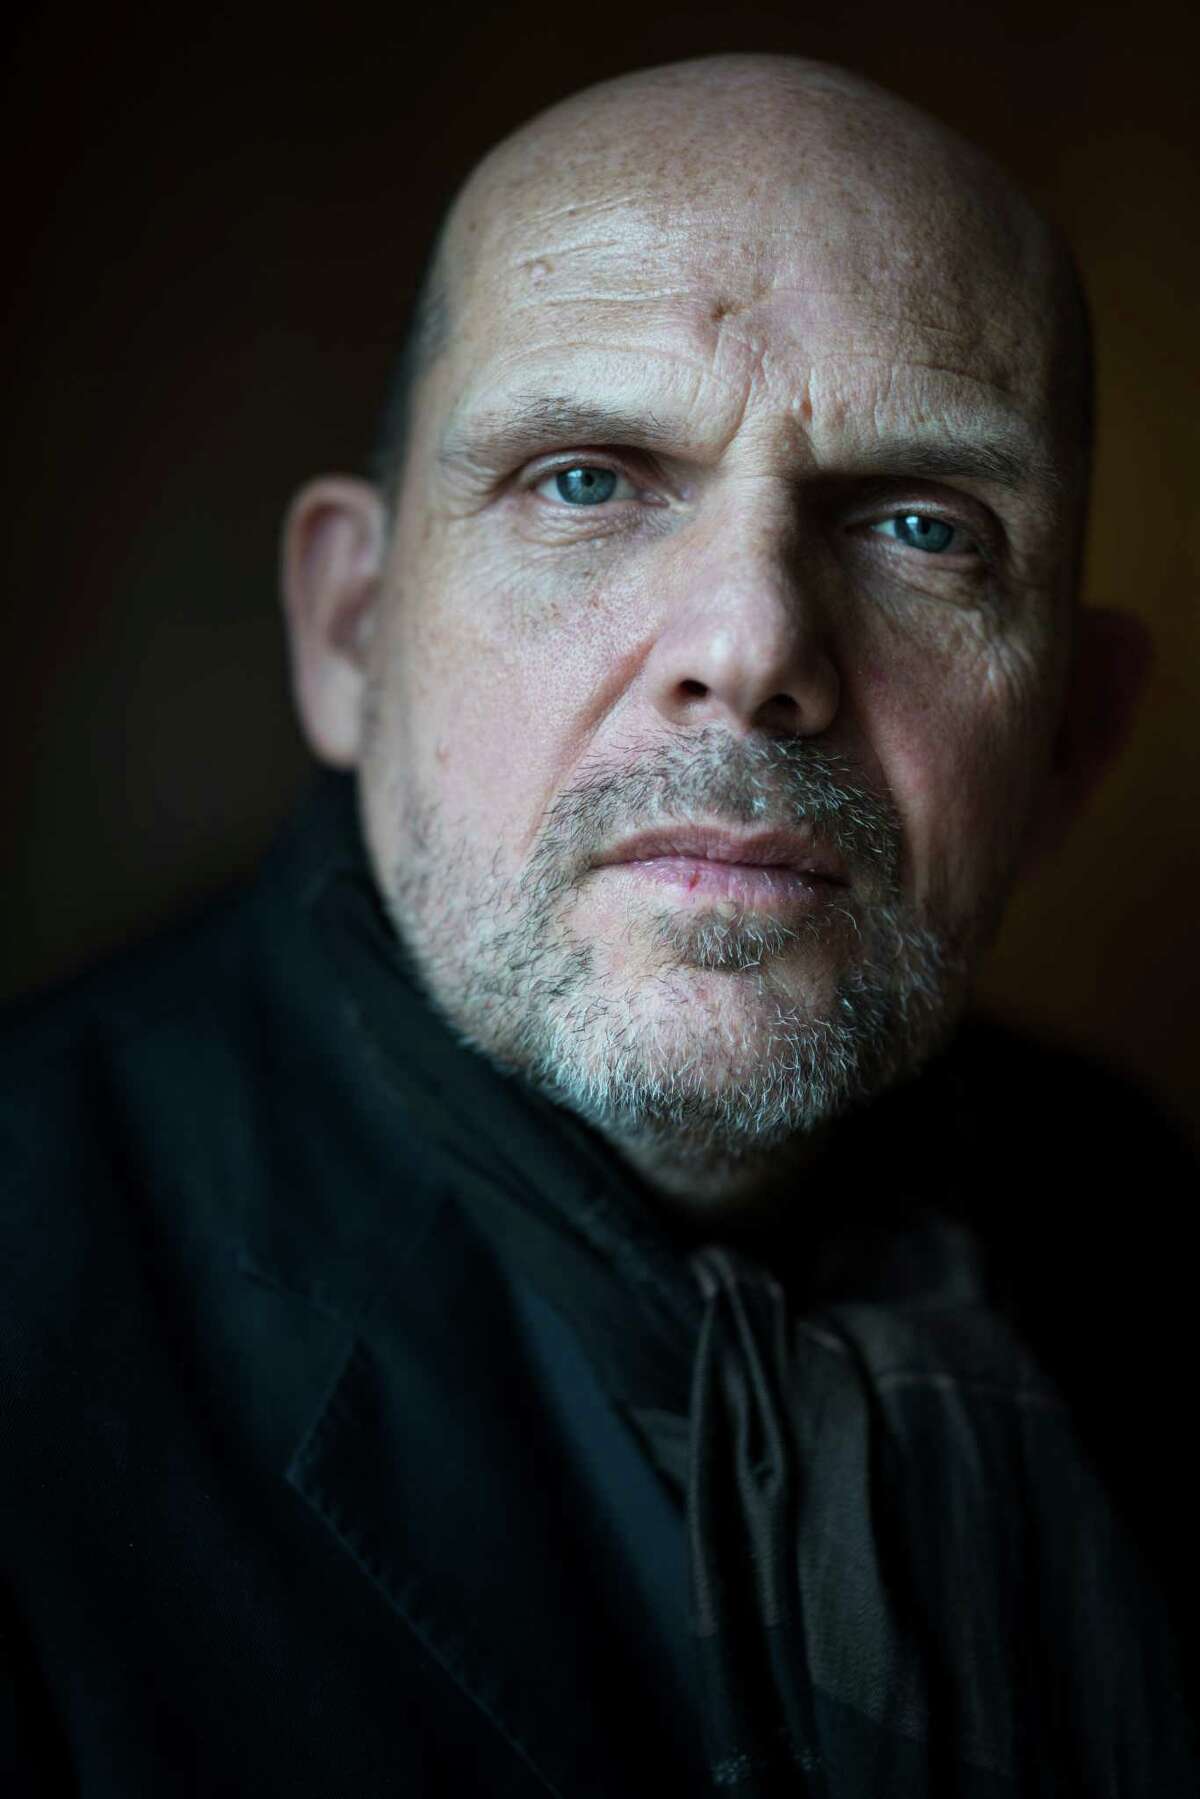 FILE-- Dutch conductor Jaap van Zweden, the music director of the Dallas Symphony Orchestra and the Hong Kong Philharmonic Orchestra, in New York, Jan. 26, 2016. Van Zweden will continue with the Hong Kong Philharmonic Orchestra even as he becomes music director of the New York Philharmonic in 2018. (Todd Heisler/The New York Times)